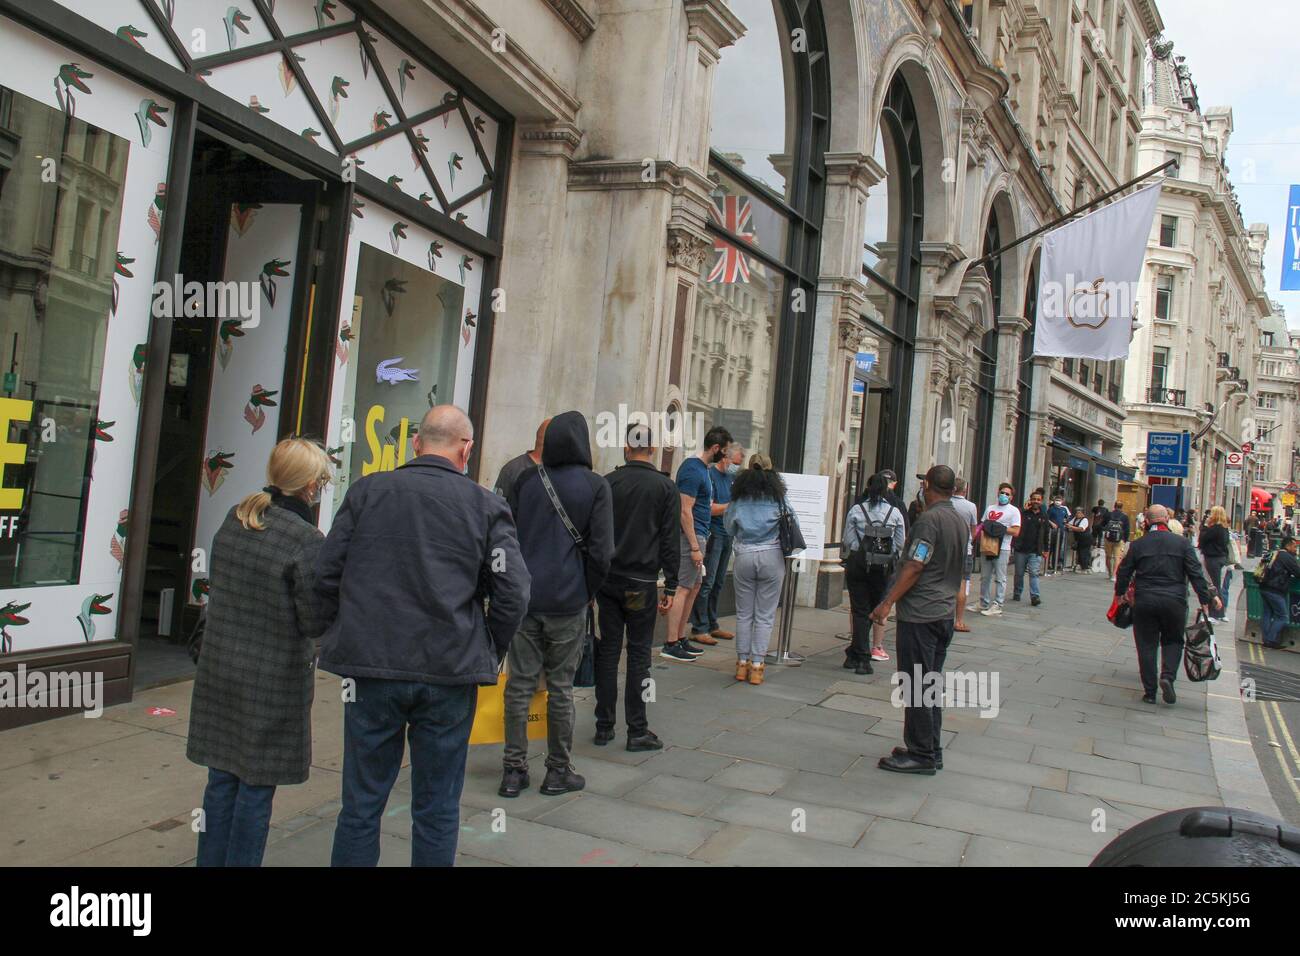 Westminster, London, UK - 3 July 2020: Customers queue at the Apple shop on Regent Street. All customers had to be temperature checked to be admitted. Daily life in London on a friday ahead of the opening of pubs on the 4th of July as per new Government advice. Stock Photo